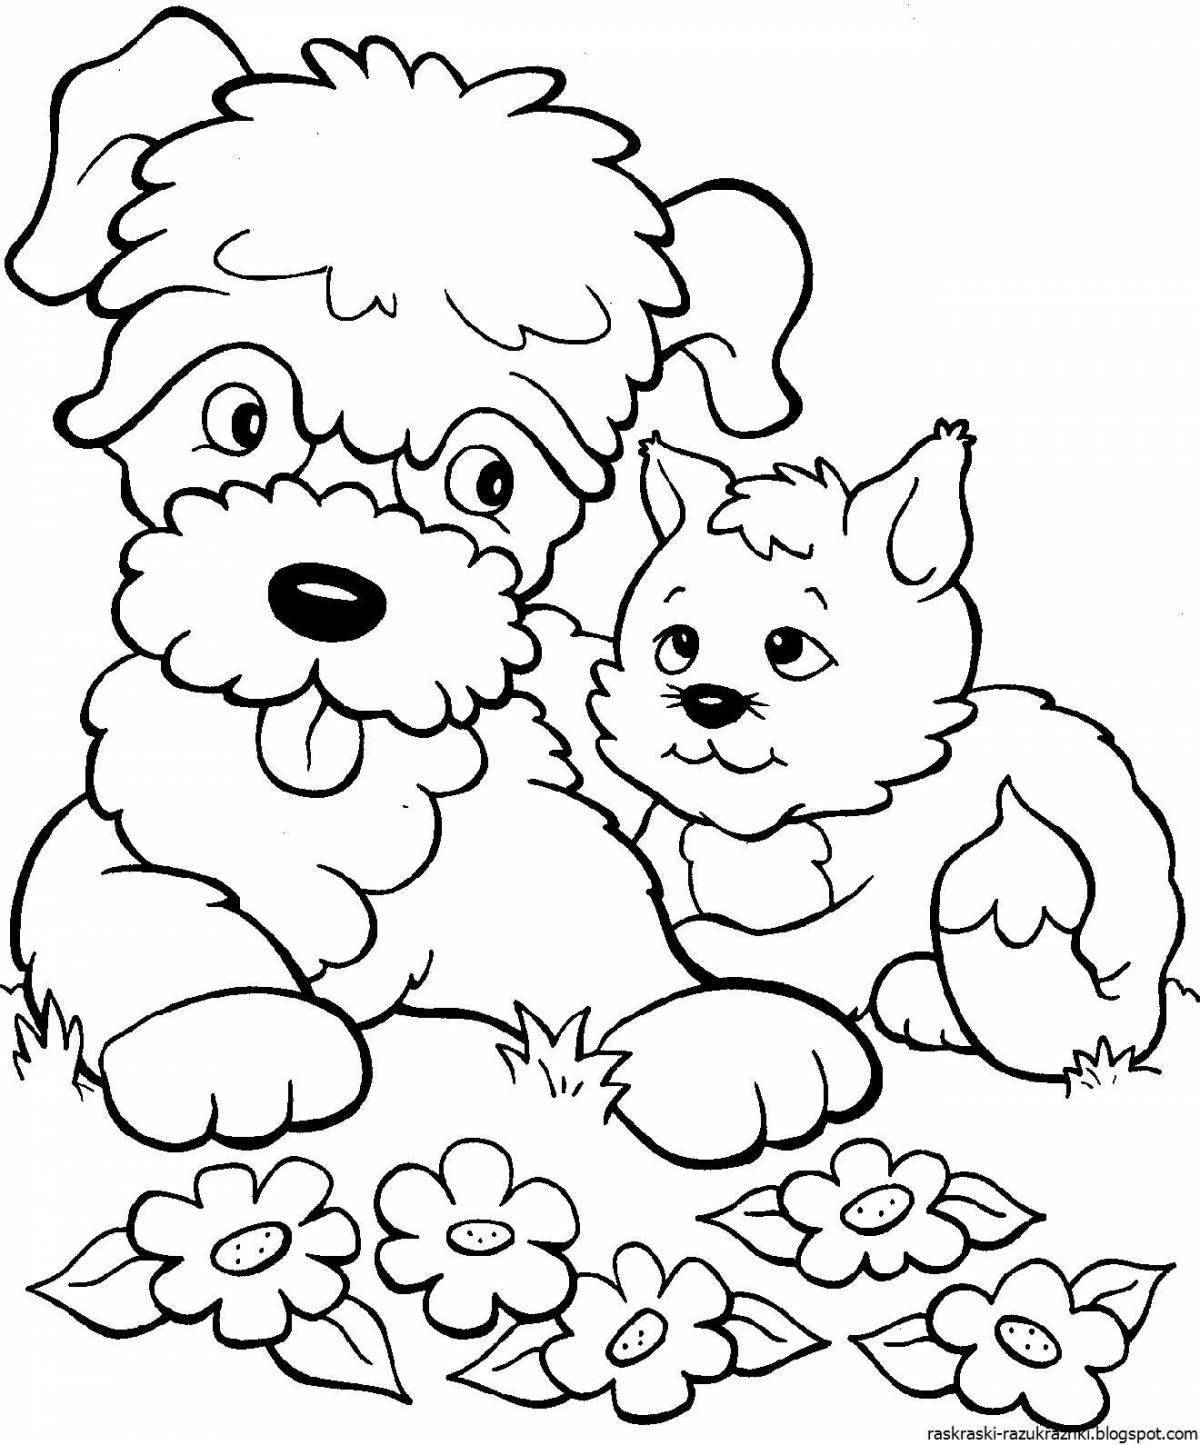 Fancy coloring book for girls dogs kittens